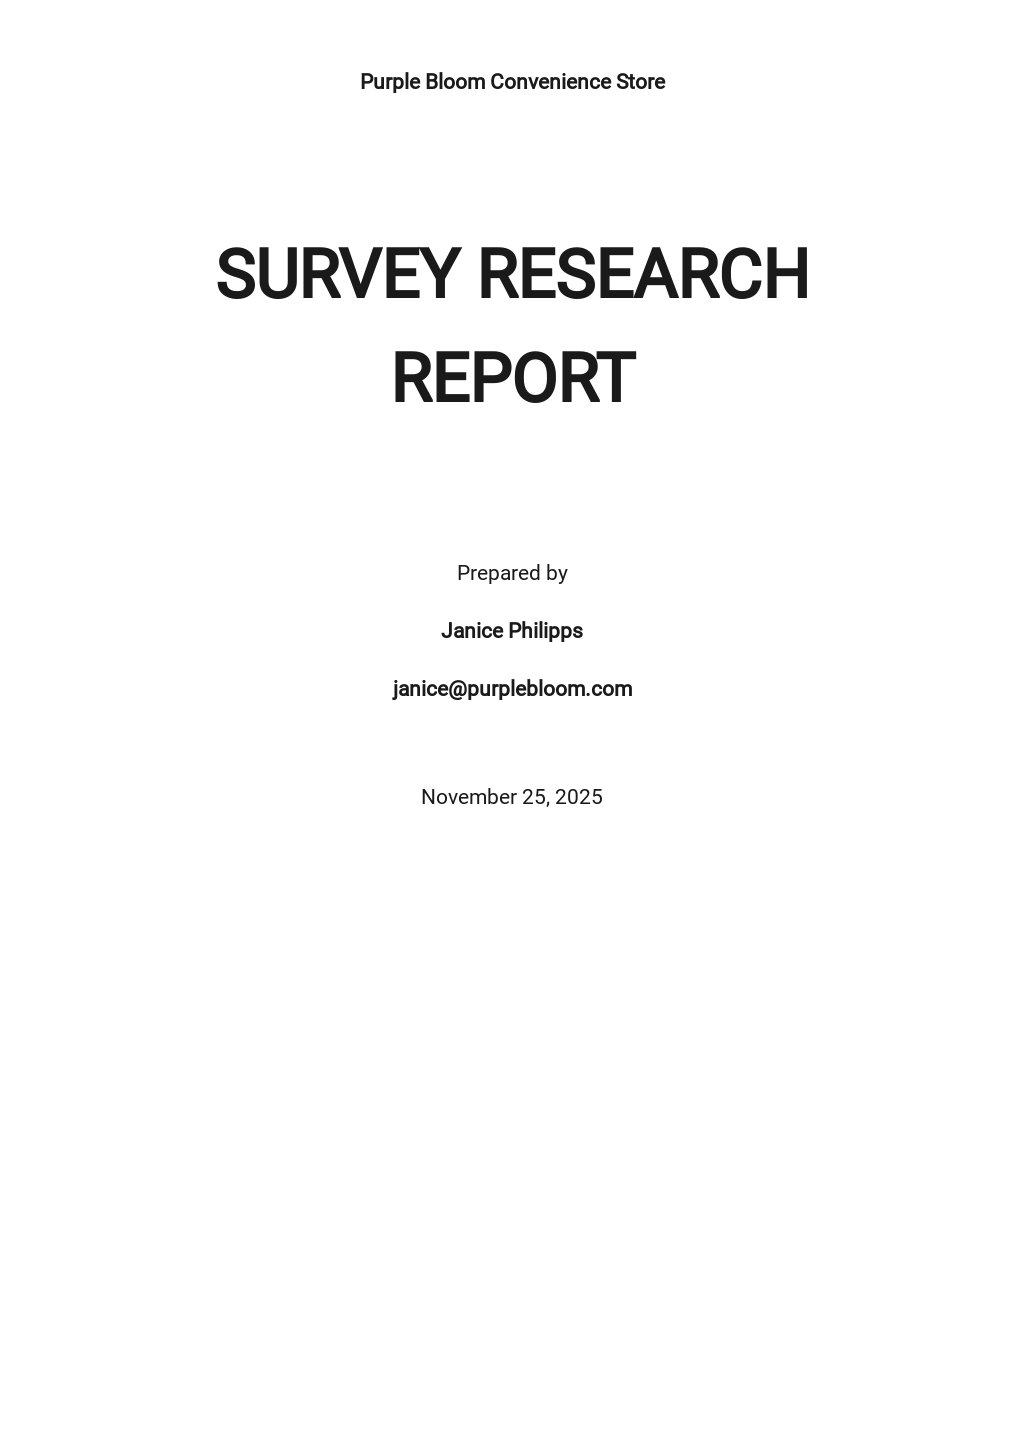 about research report